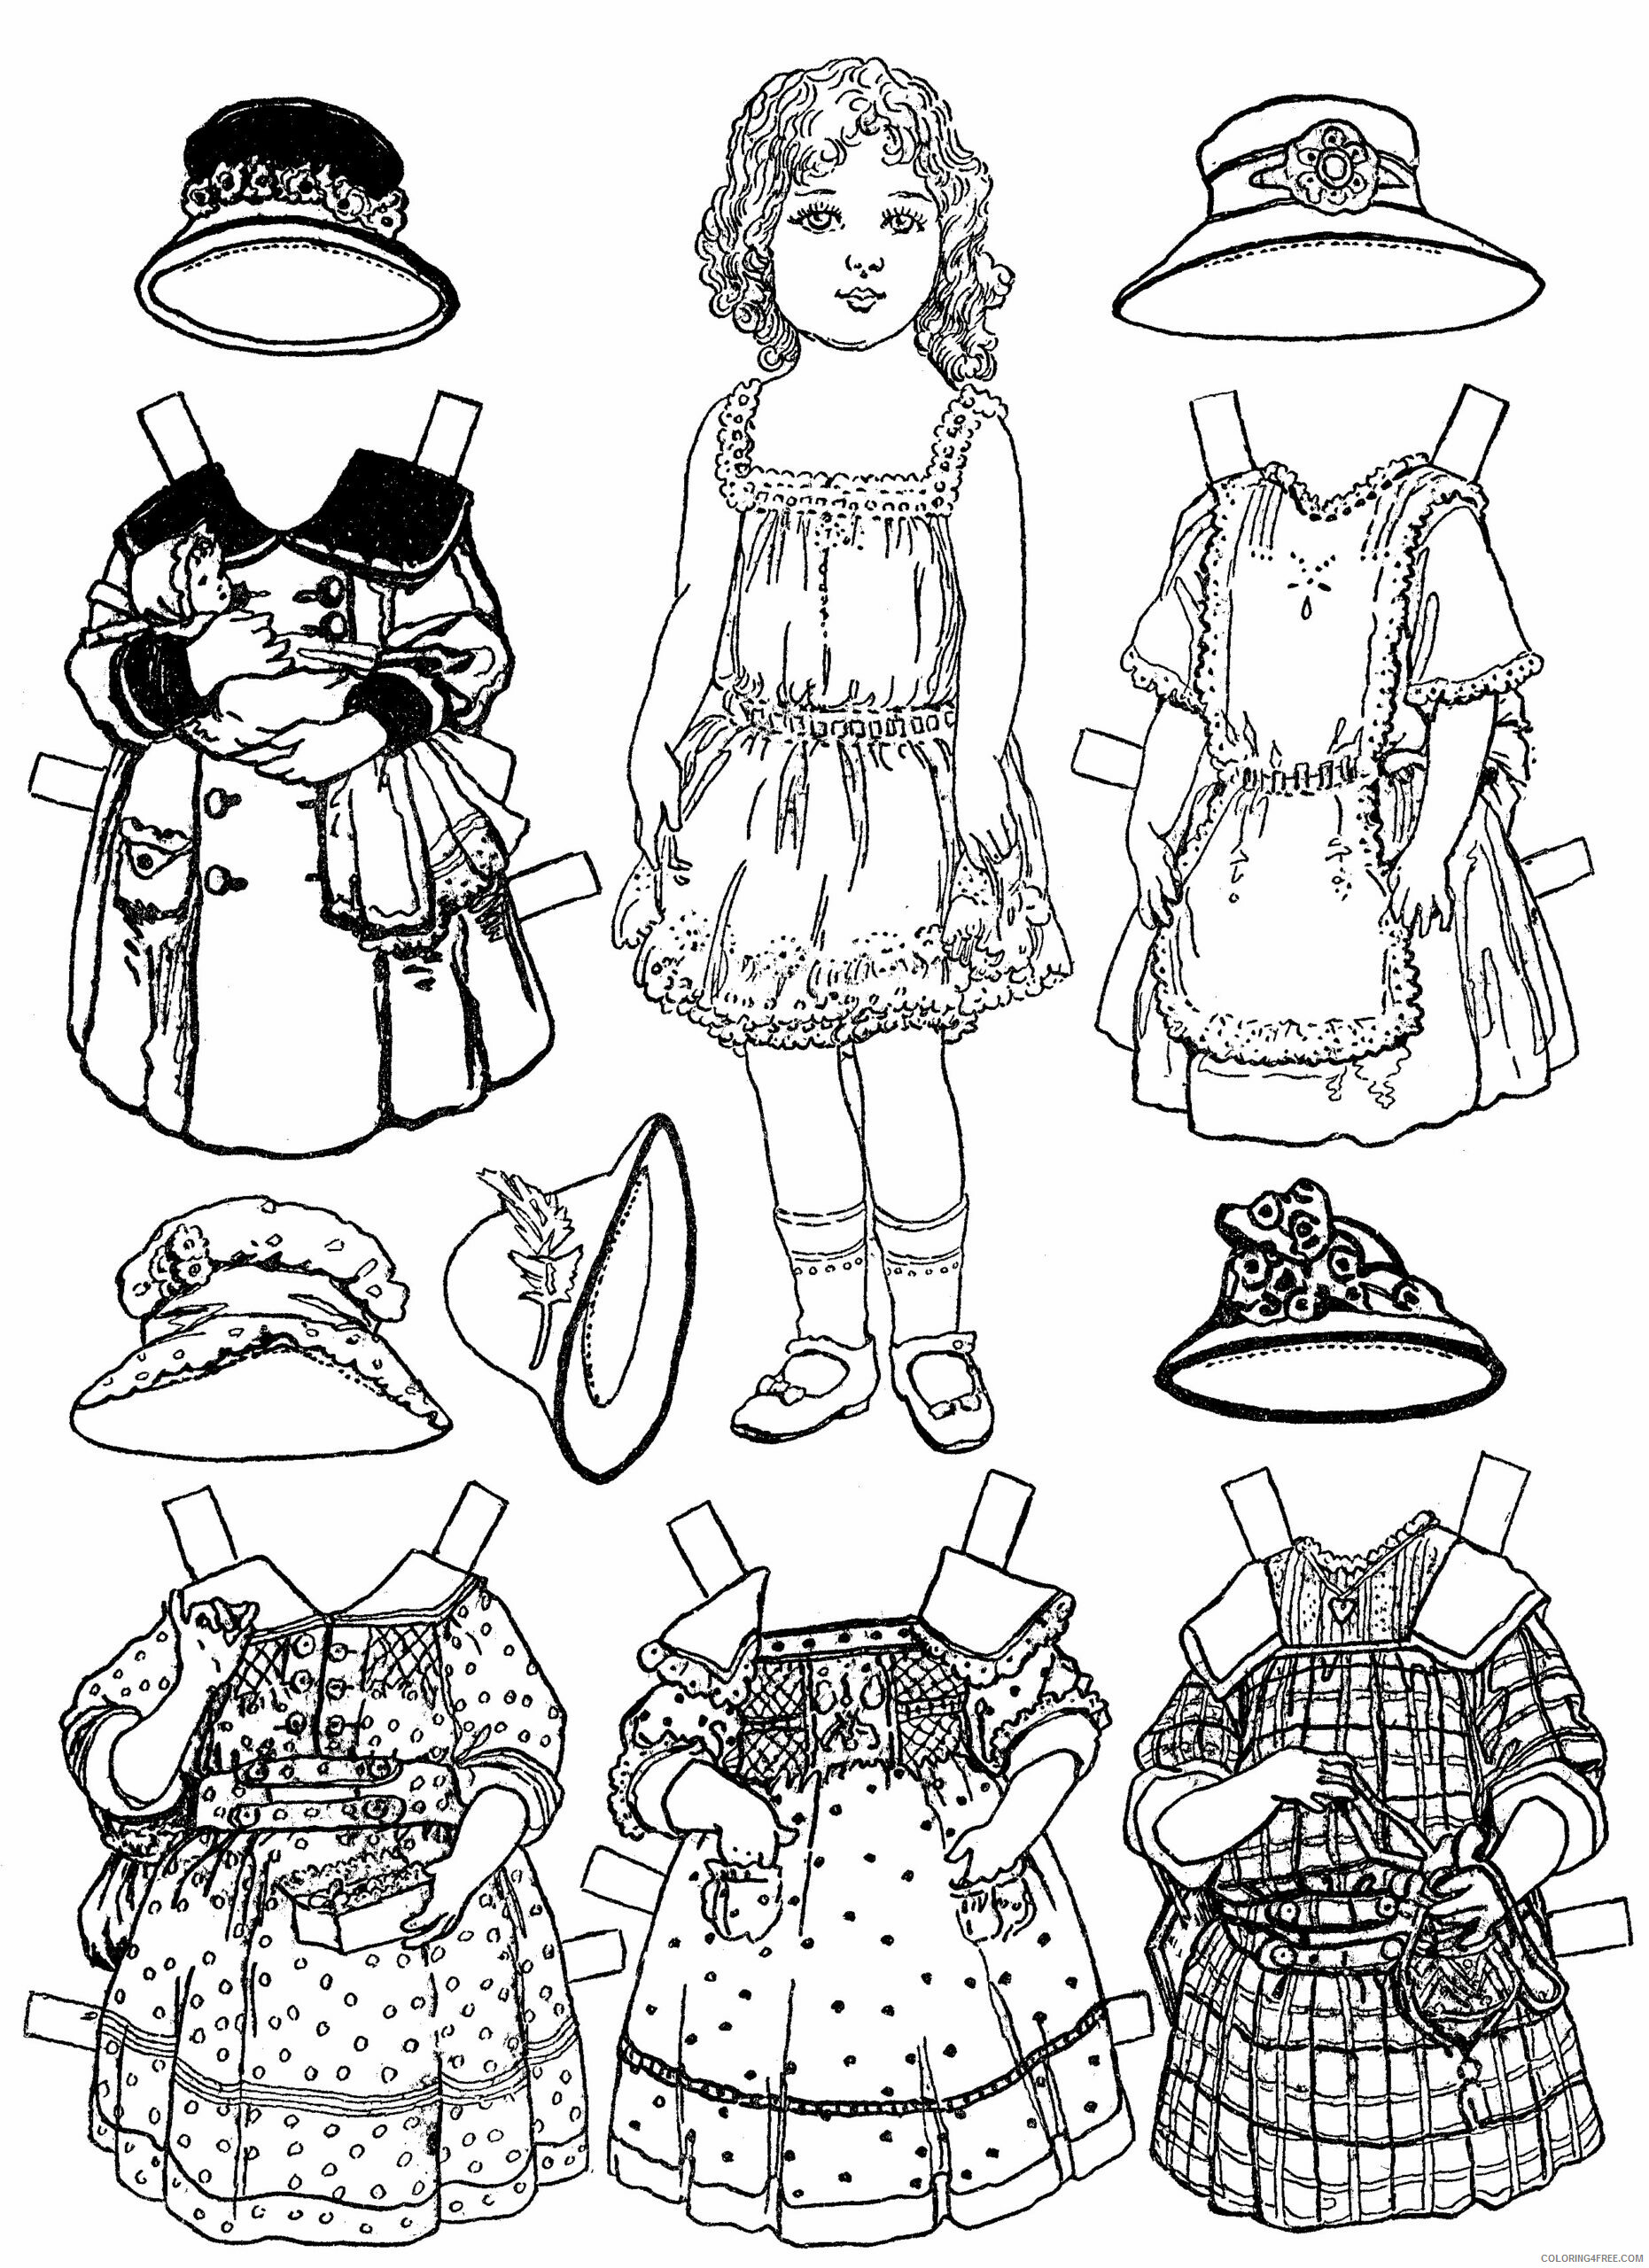 Paper Dolls Coloring Pages for Girls Paper Doll Printable 2021 0956 Coloring4free